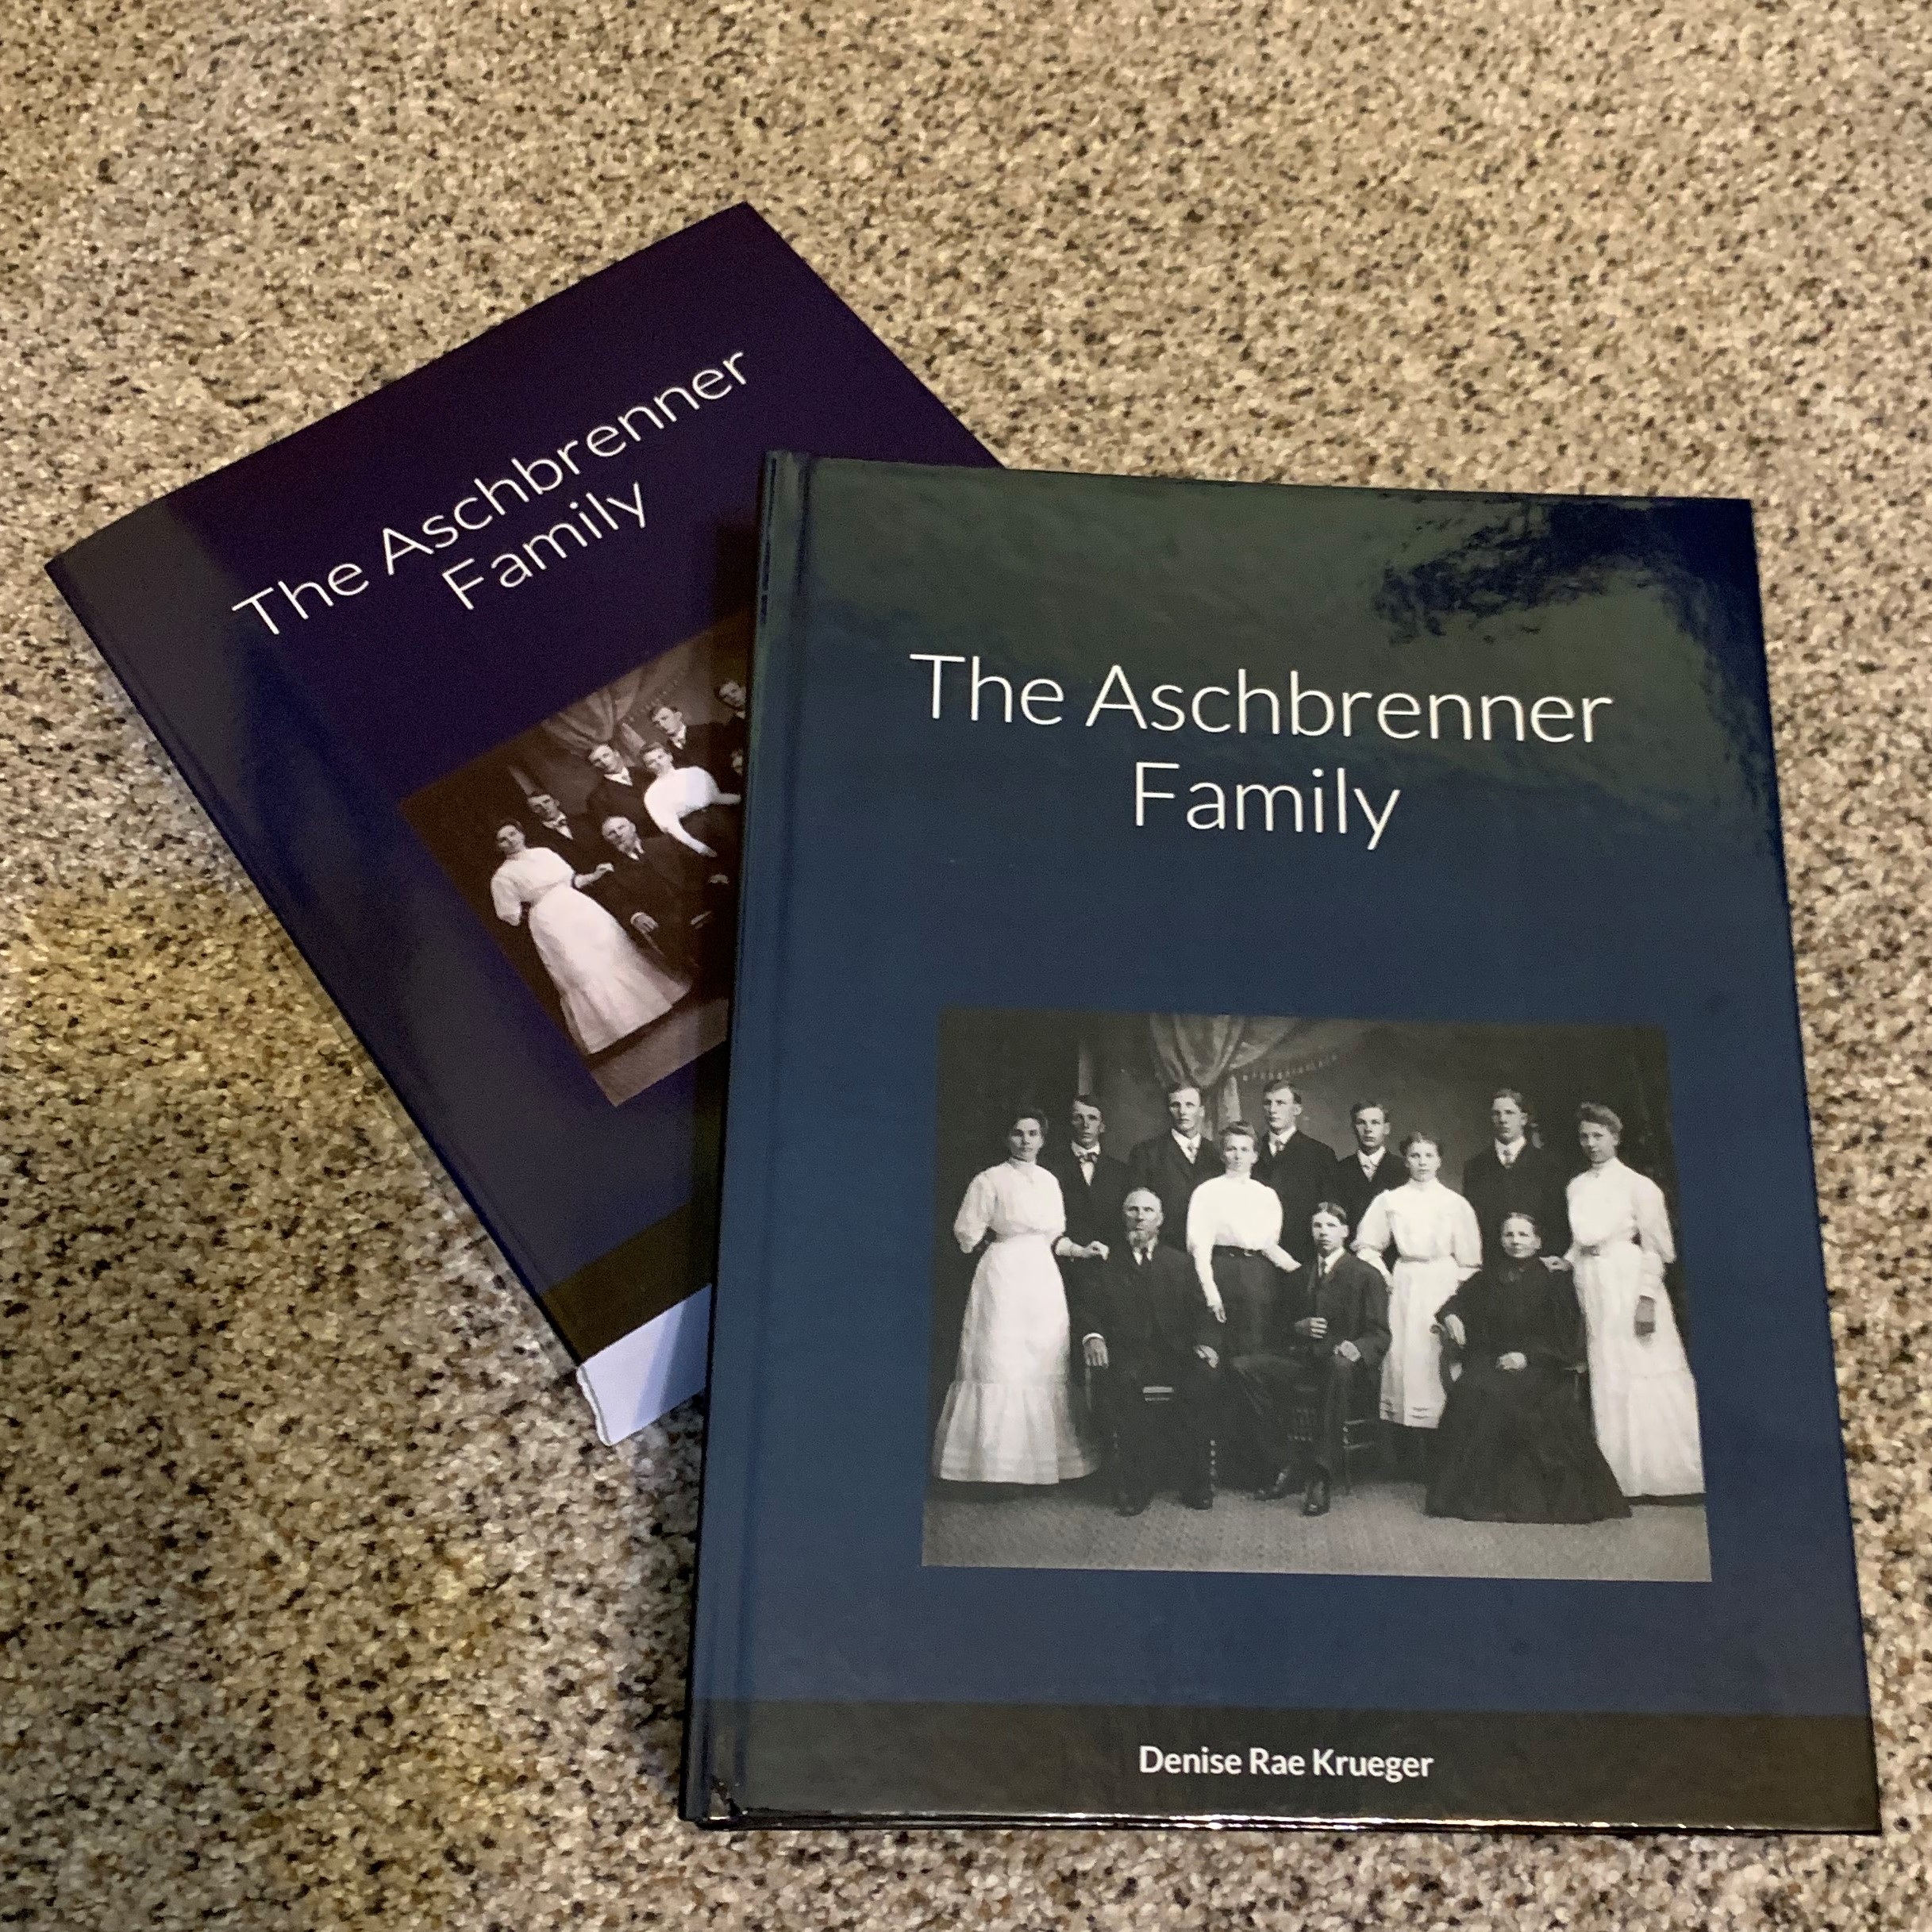 The Aschbrenner Family book is finished!